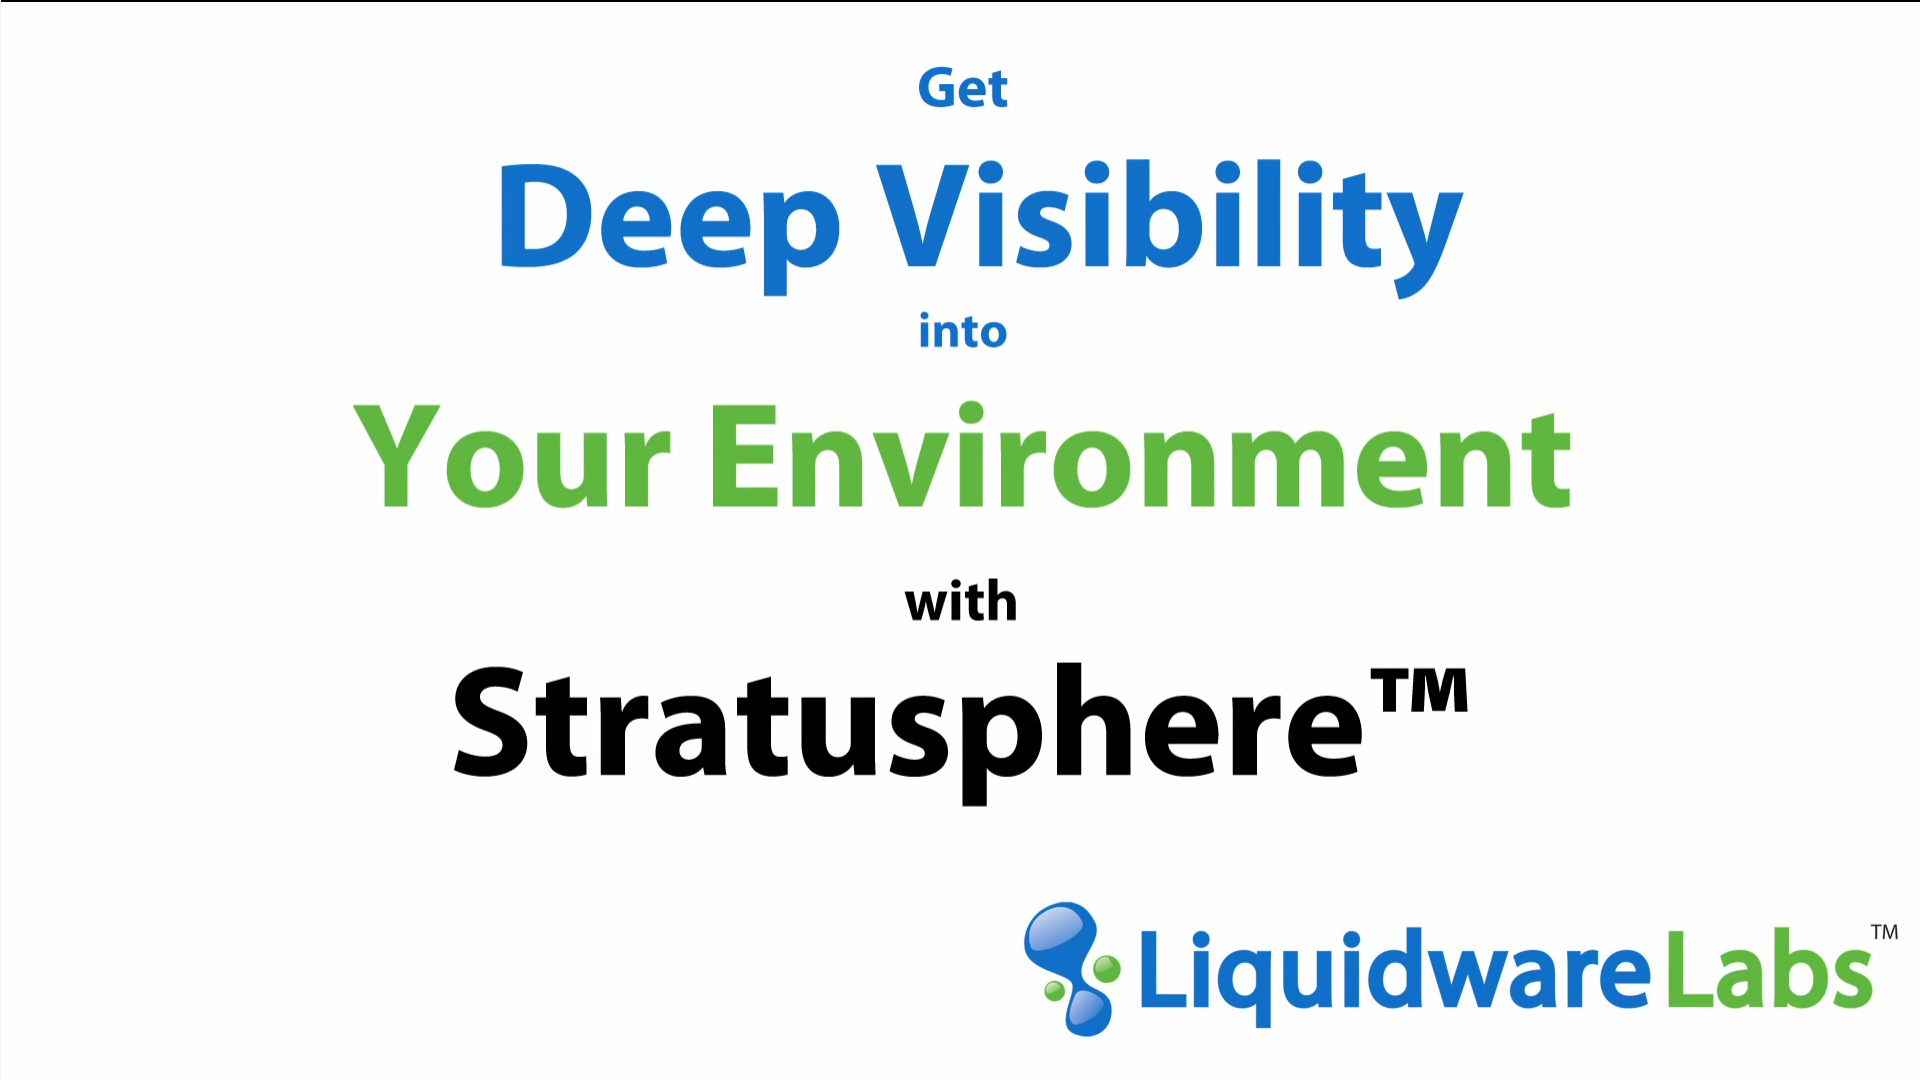 Get Deep Visibility Into Your Environment with Stratusphere